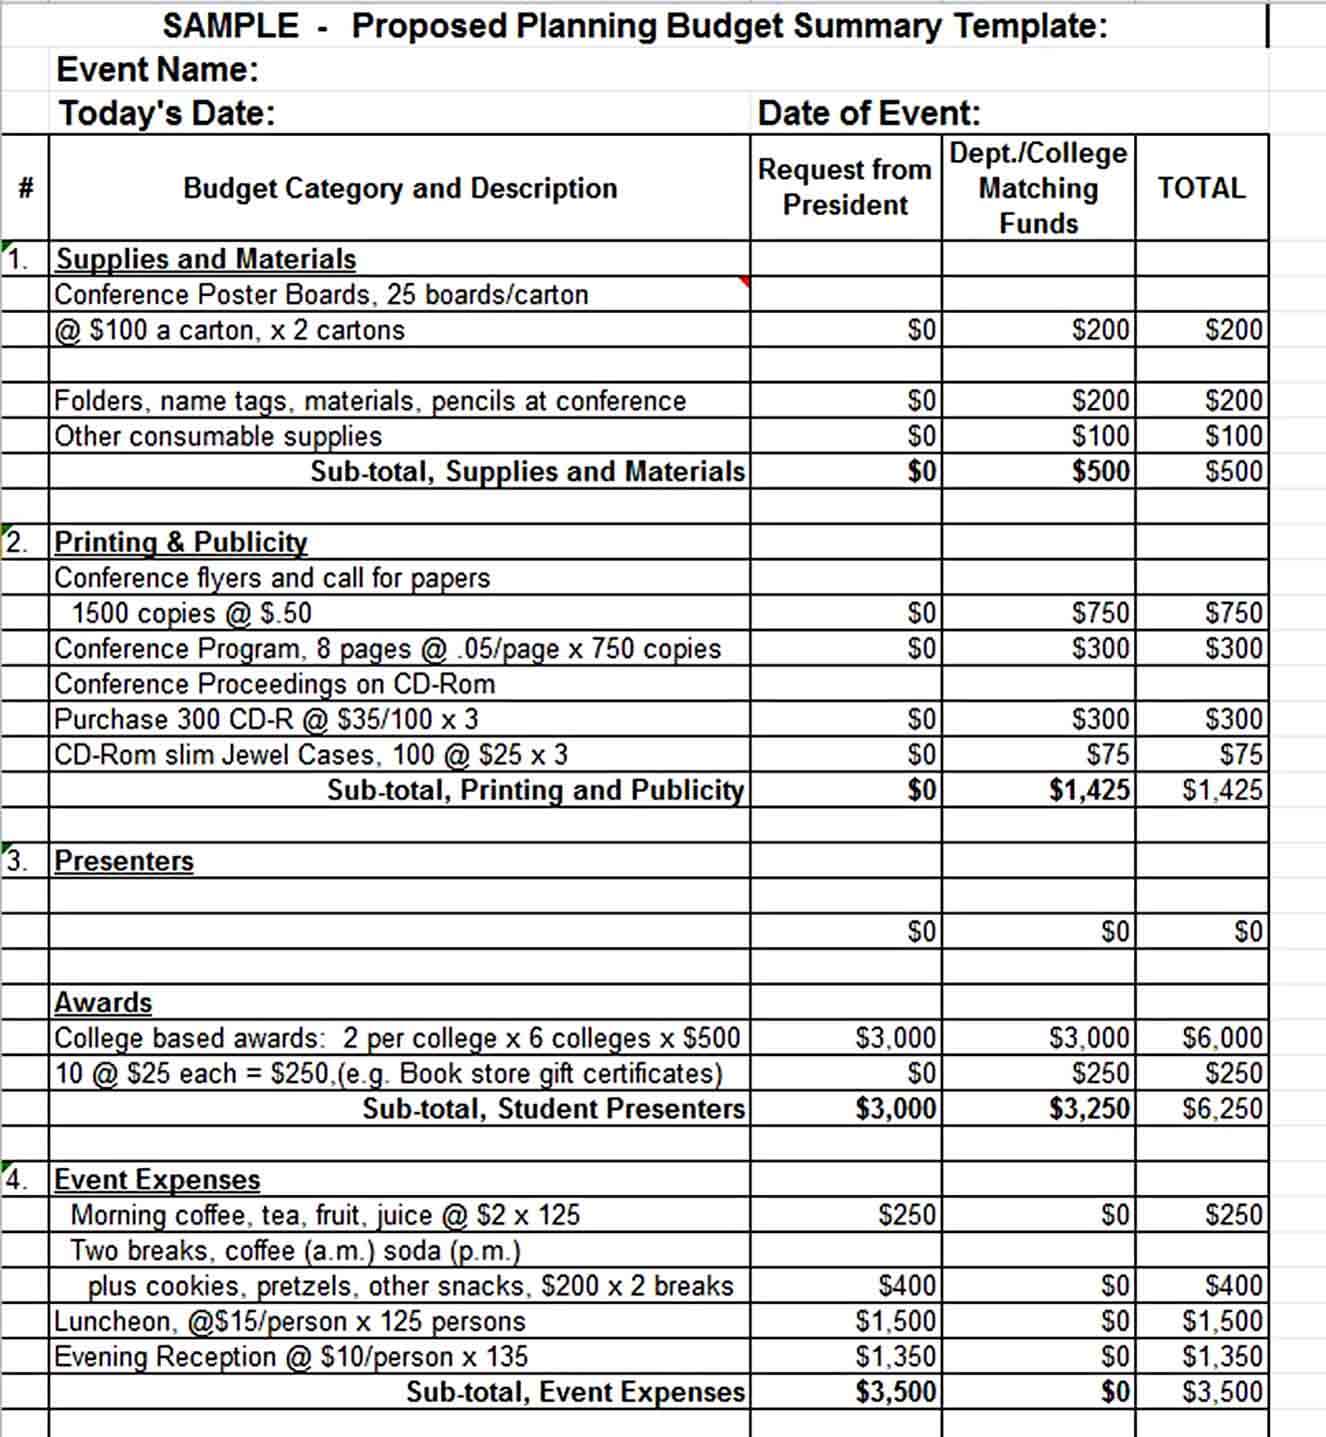 Sample Proposed Budget Planning Summary Template 1